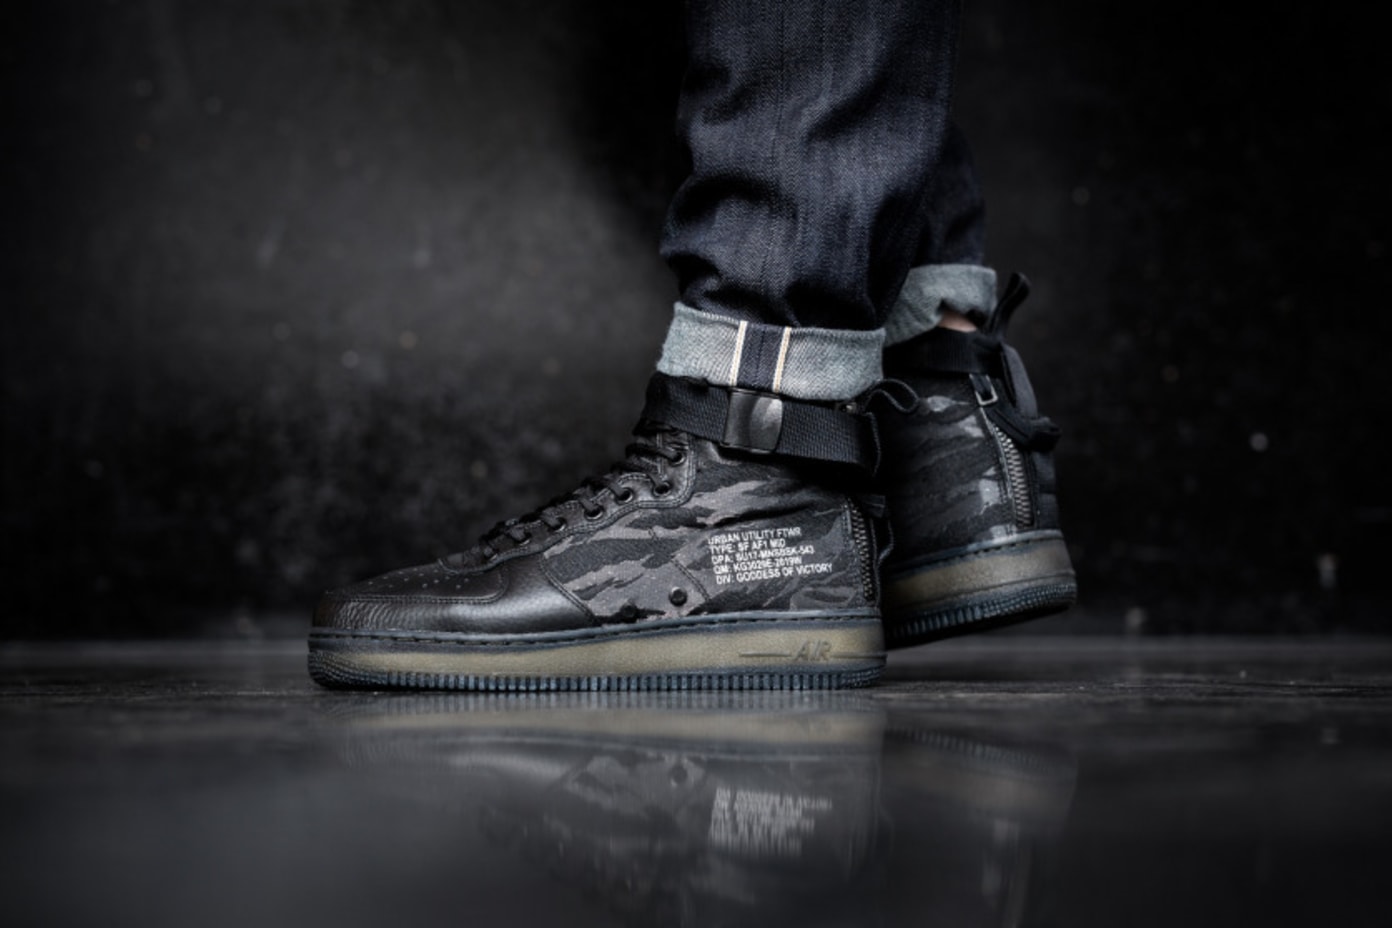 special field air force 1 mid